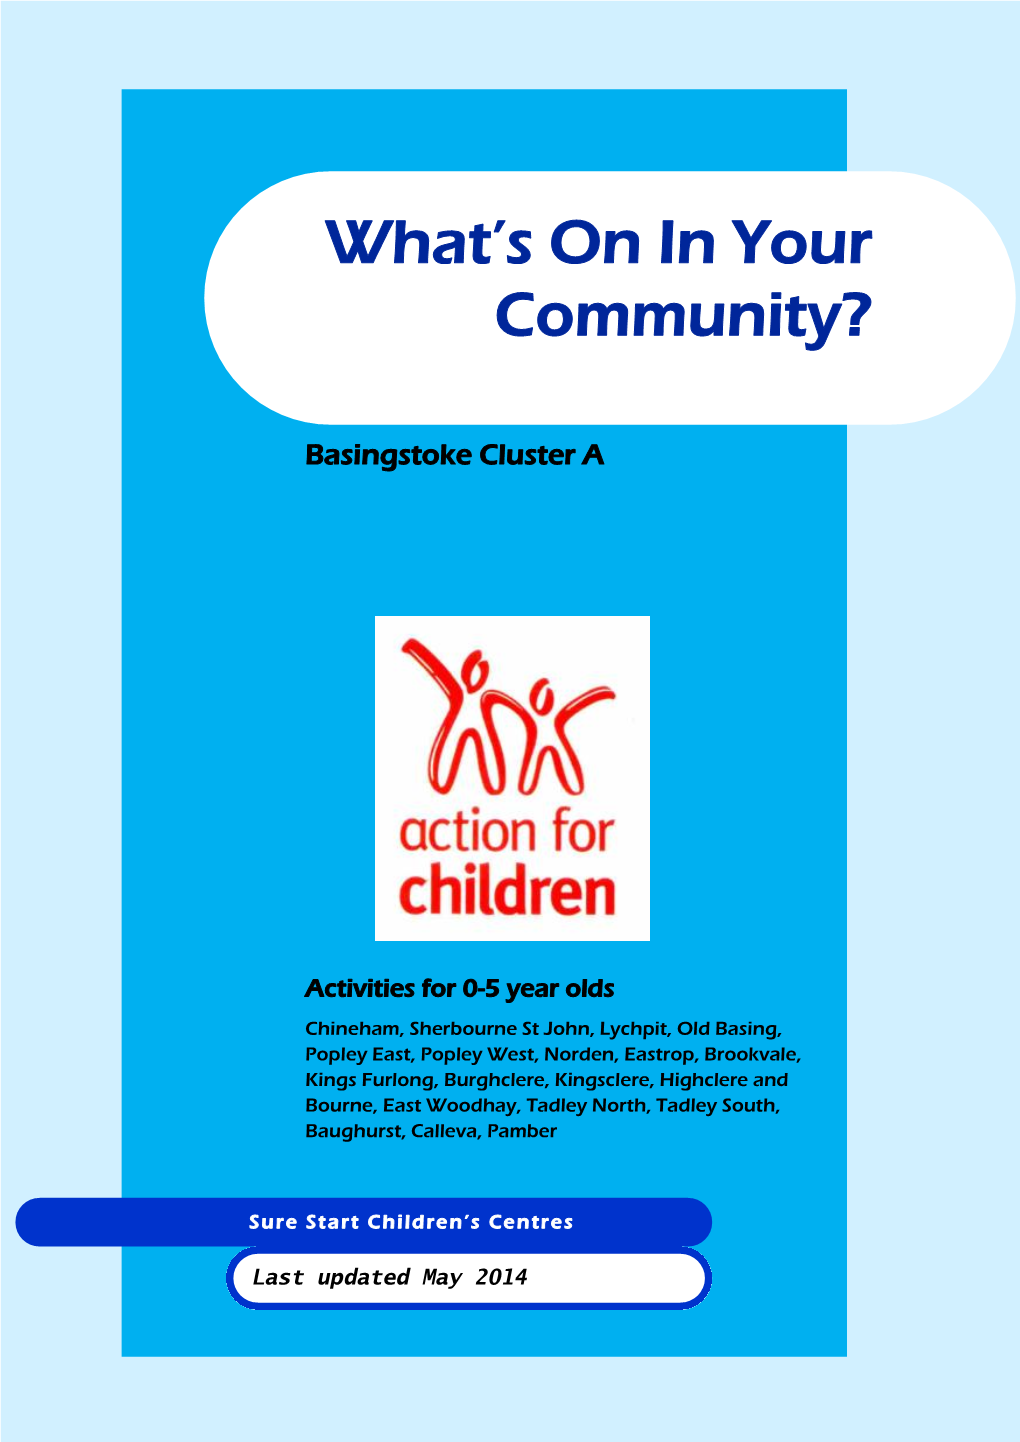 What's on in Your Community?